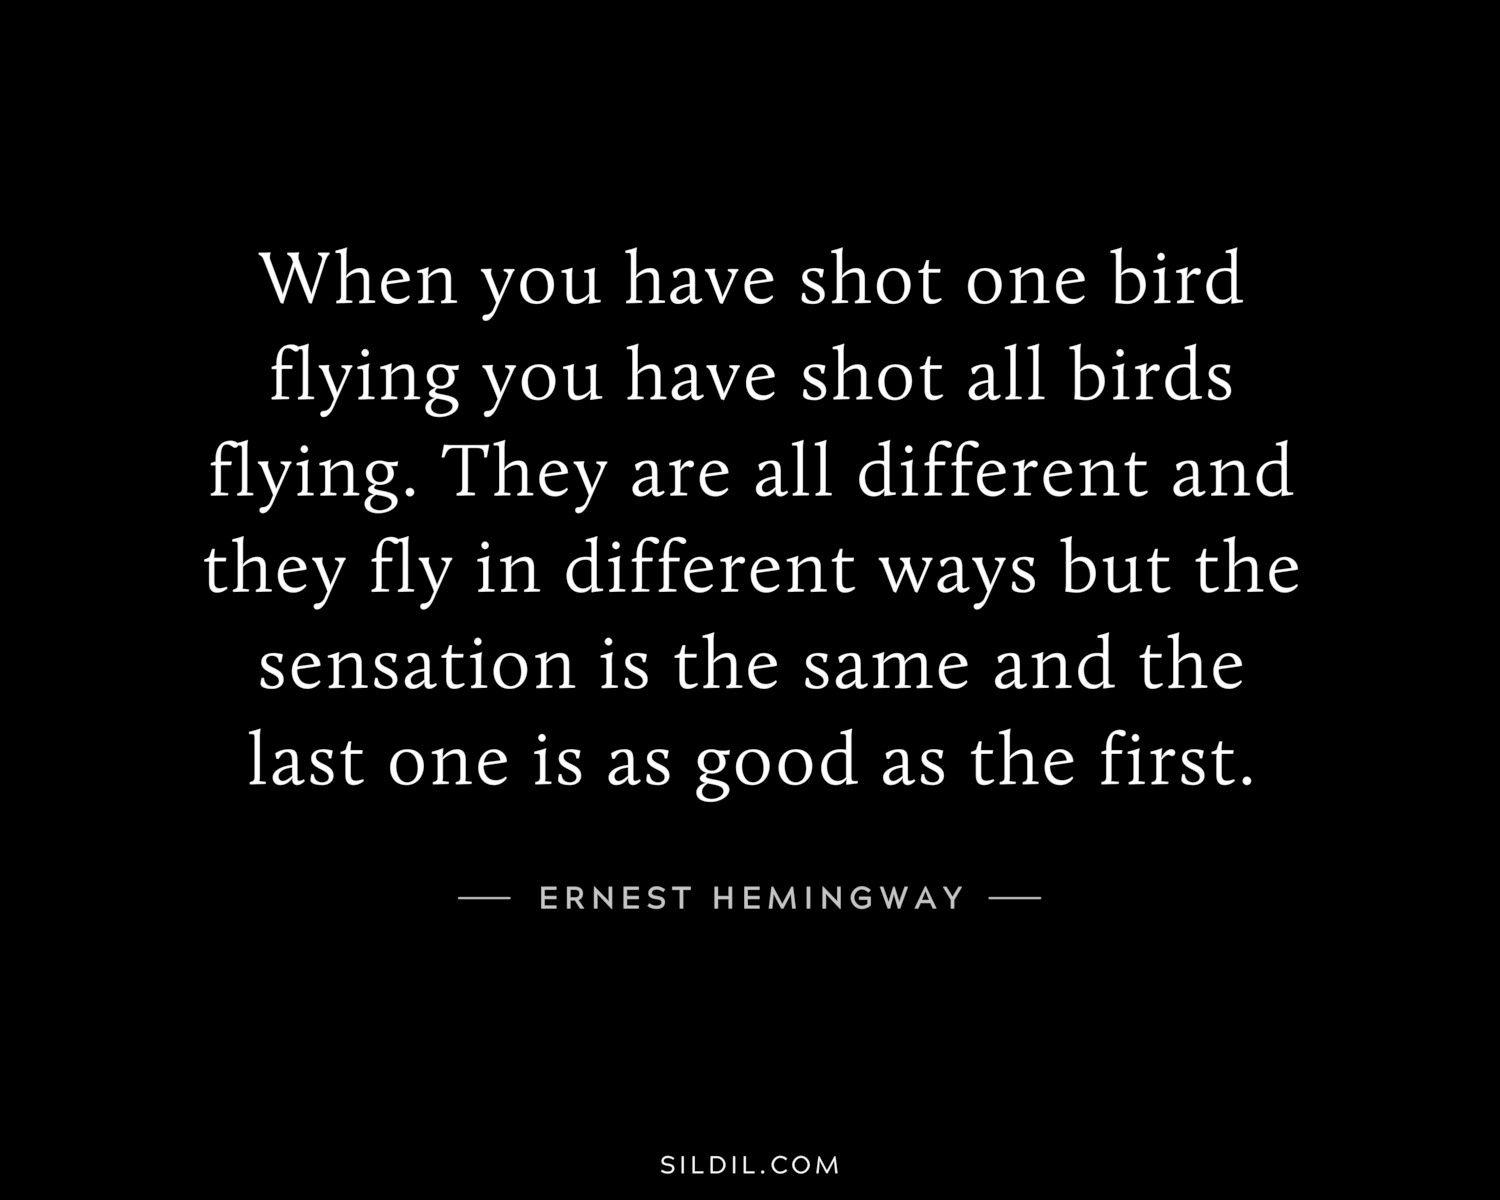 When you have shot one bird flying you have shot all birds flying. They are all different and they fly in different ways but the sensation is the same and the last one is as good as the first.